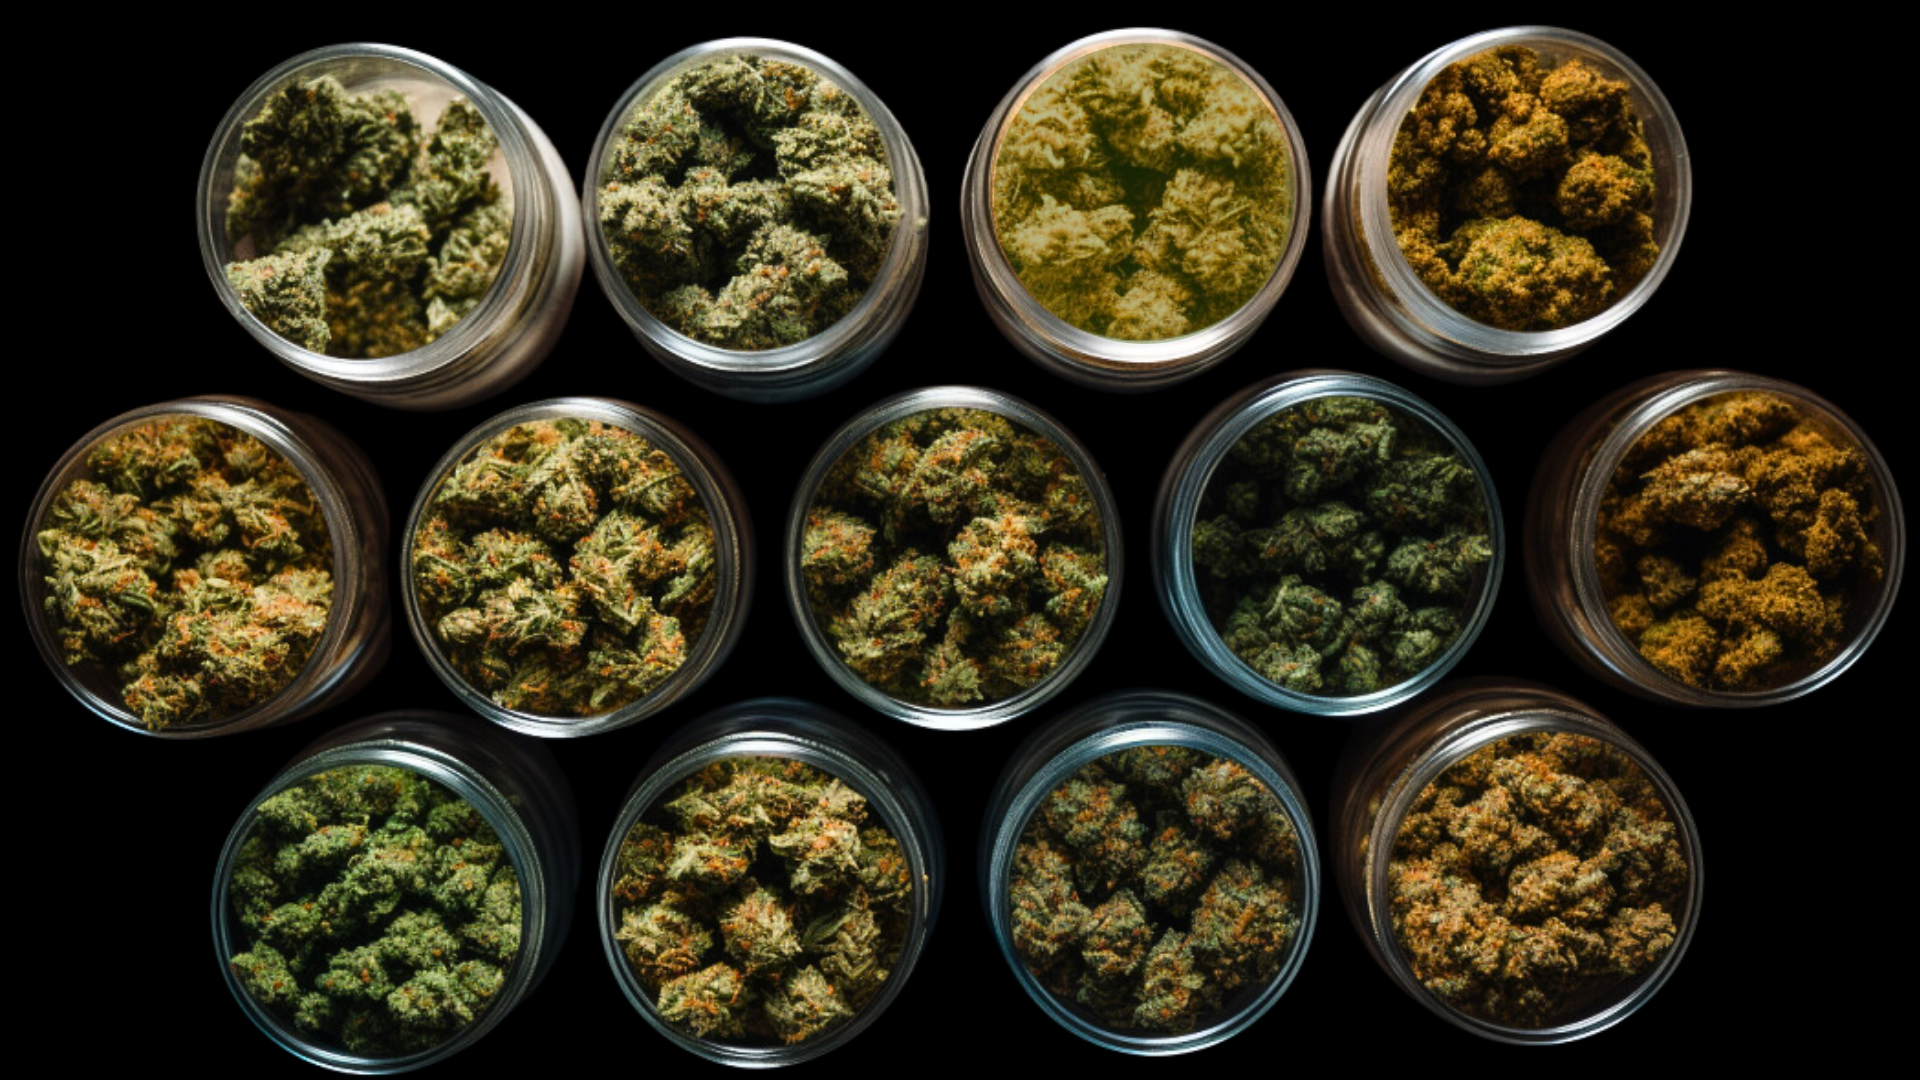 various options in cannabis strains for all star list of weed